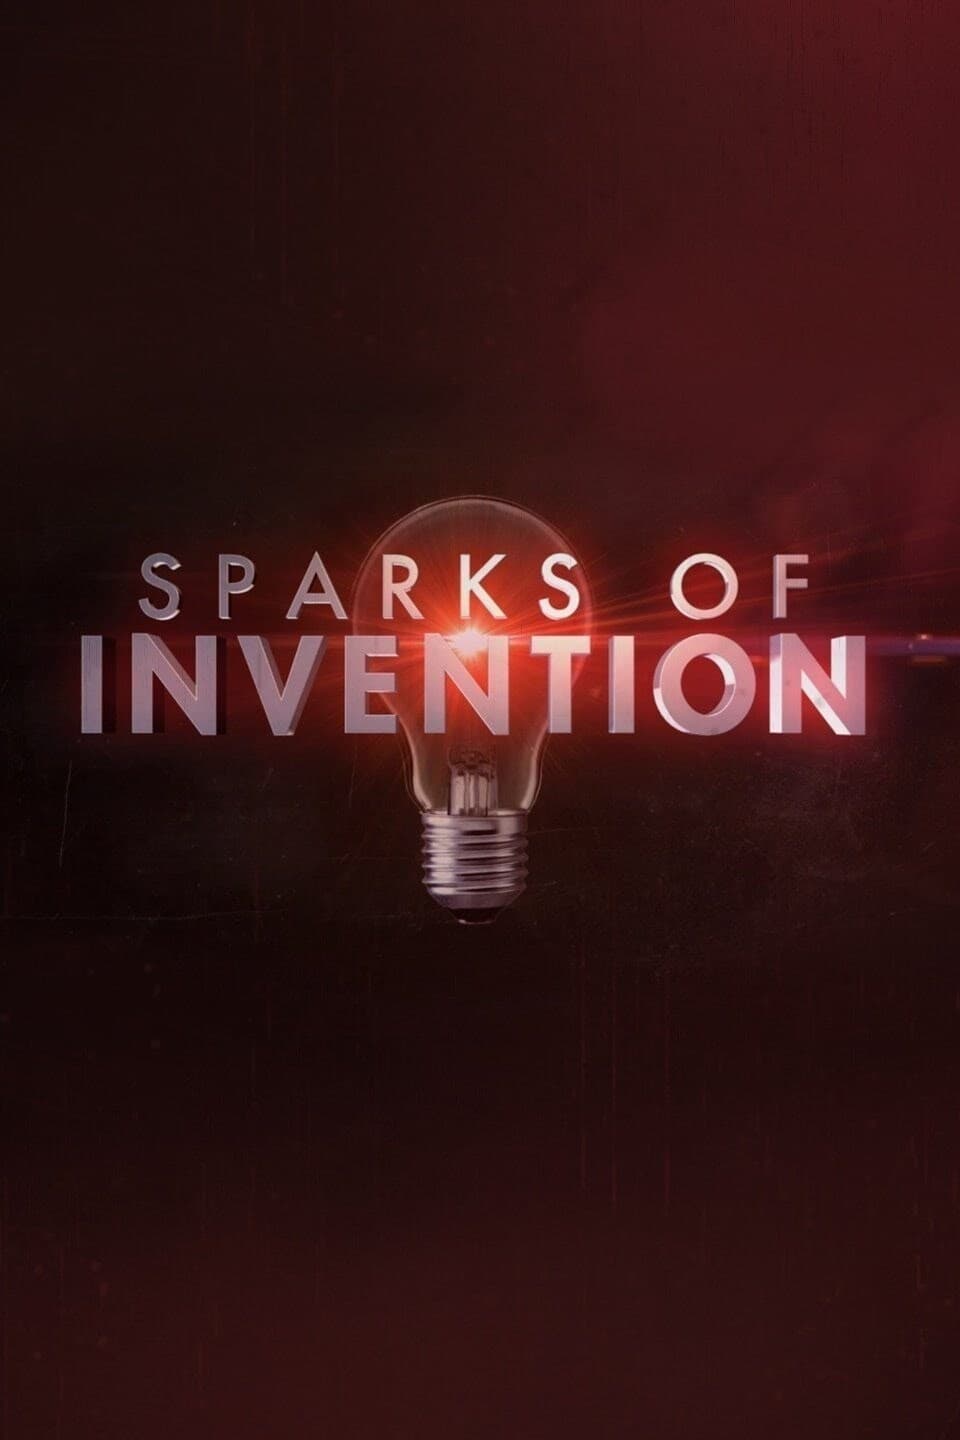 Sparks of Invention